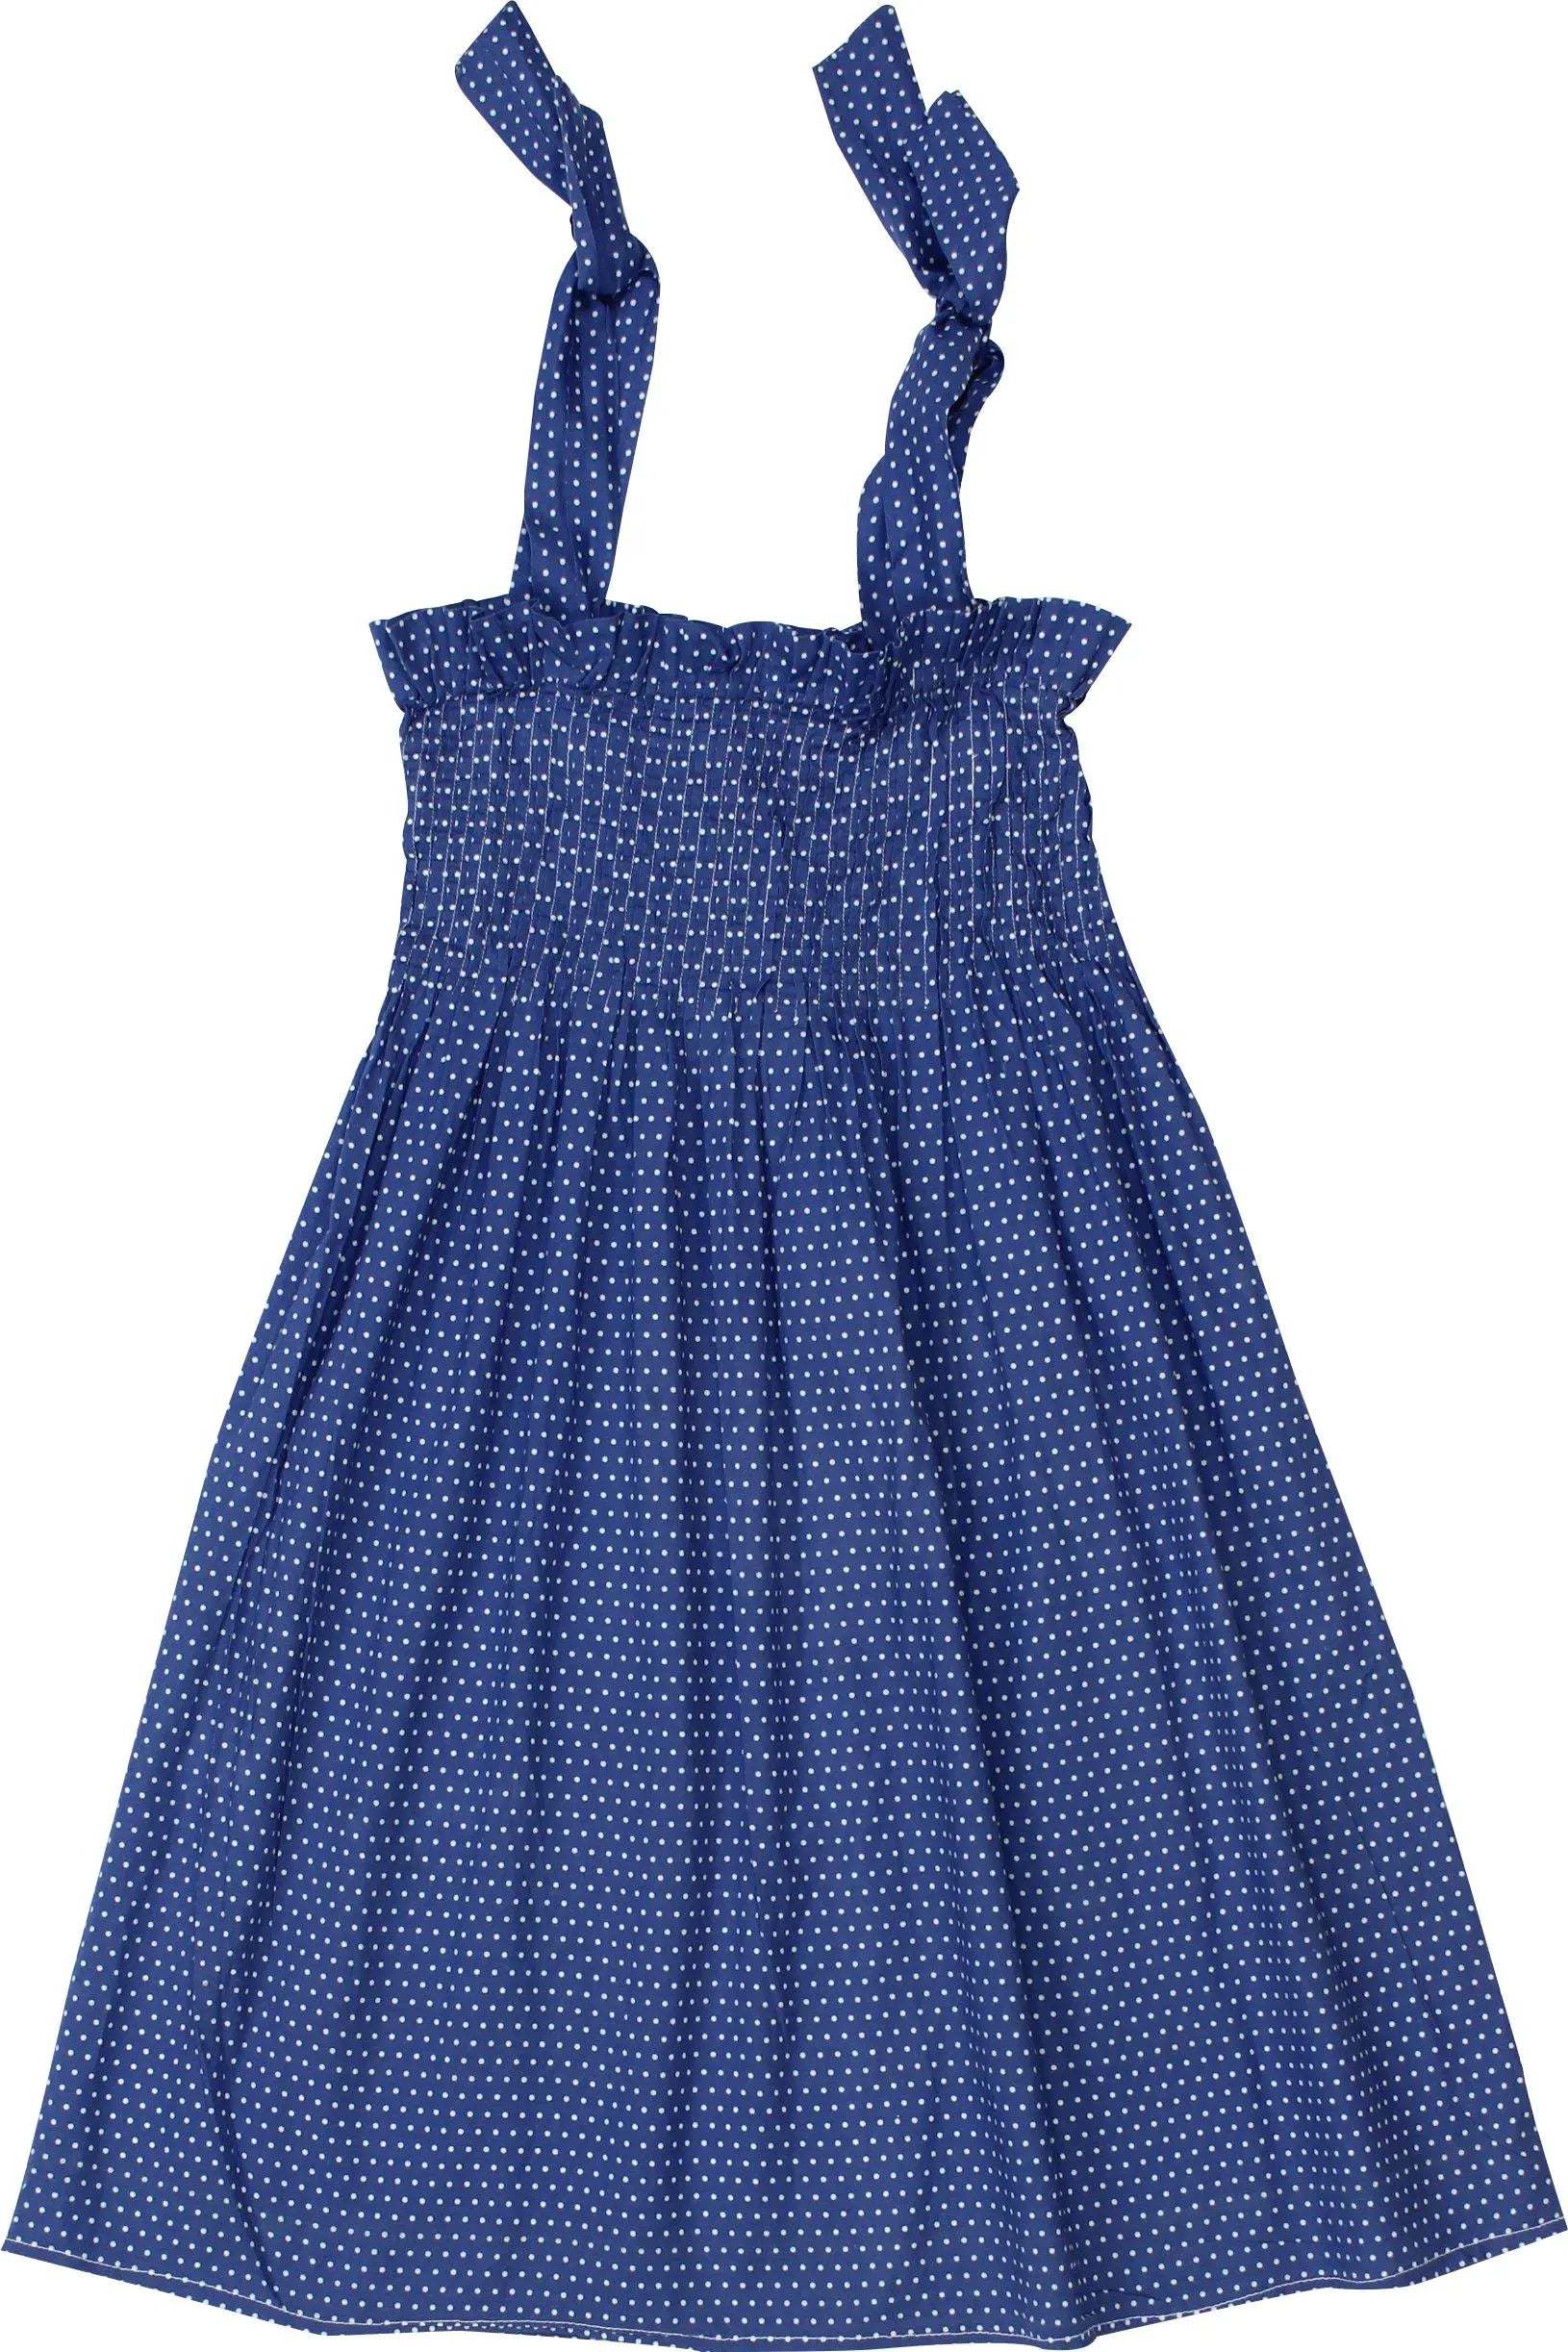 Unknown - Blue Polkadot Dress- ThriftTale.com - Vintage and second handclothing